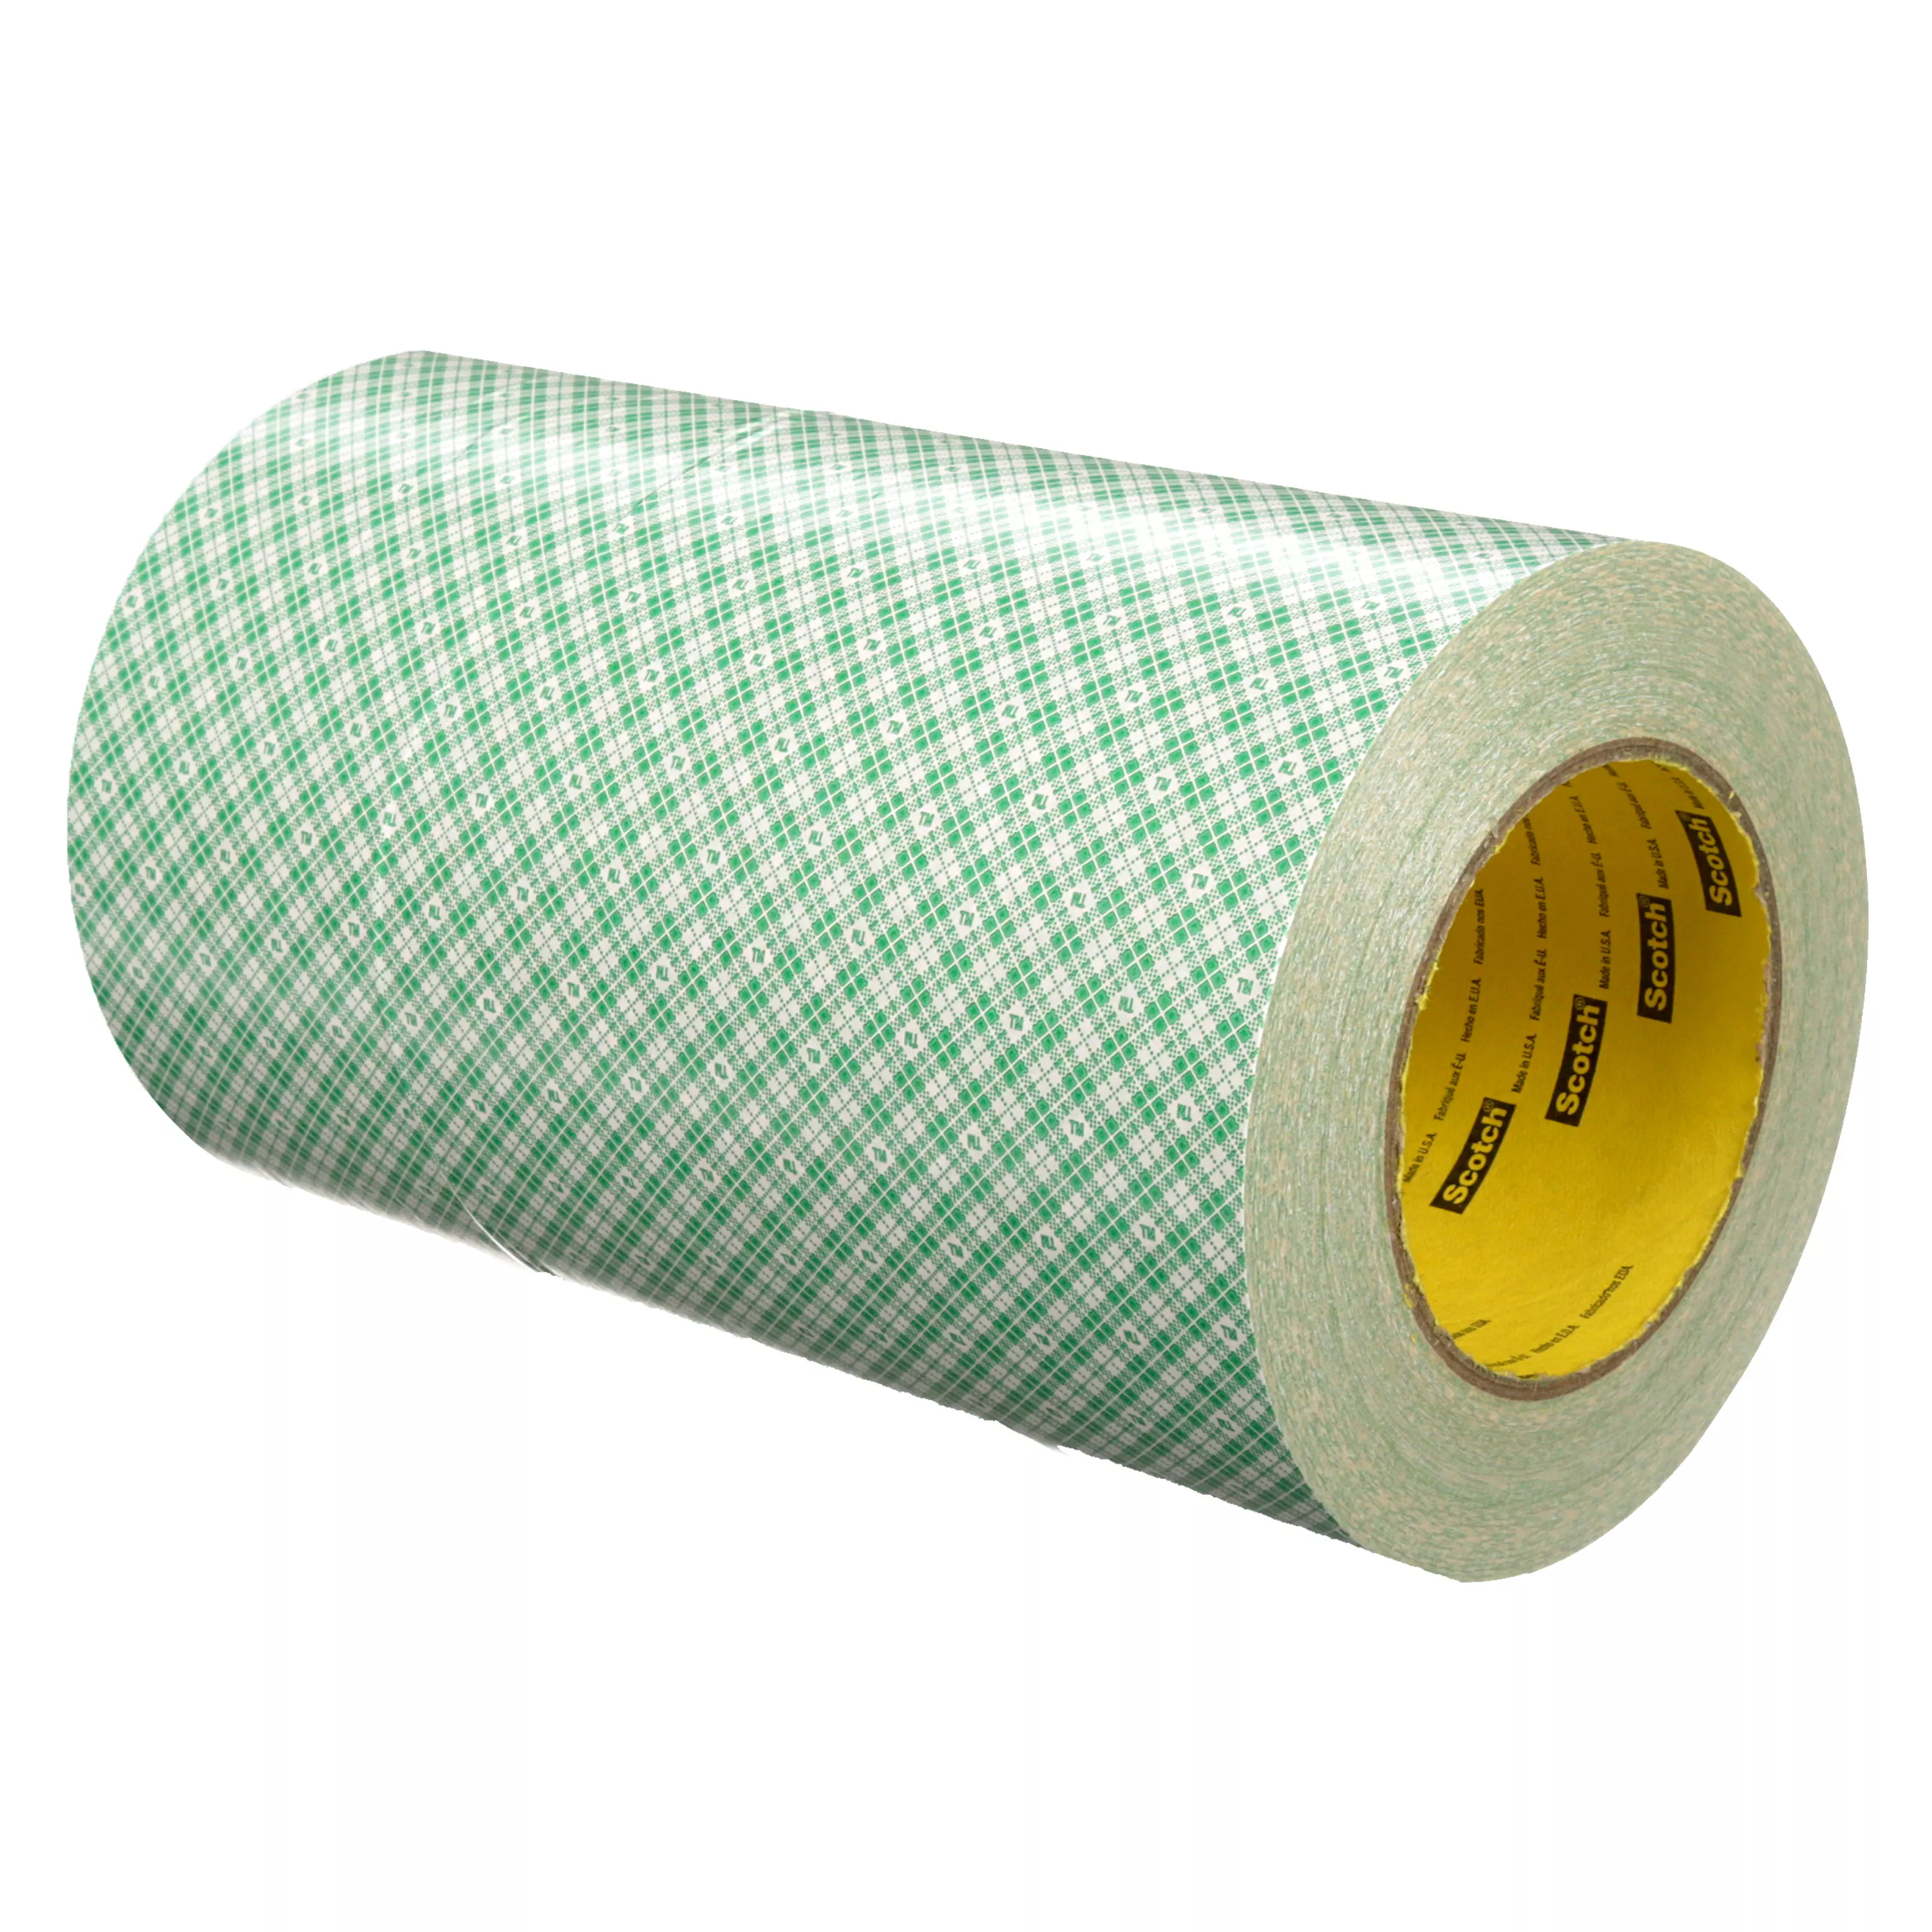 3M™ Double Coated Paper Tape 410M, Natural, 8 in x 36 yd, 5 mil, 4 rolls
per case